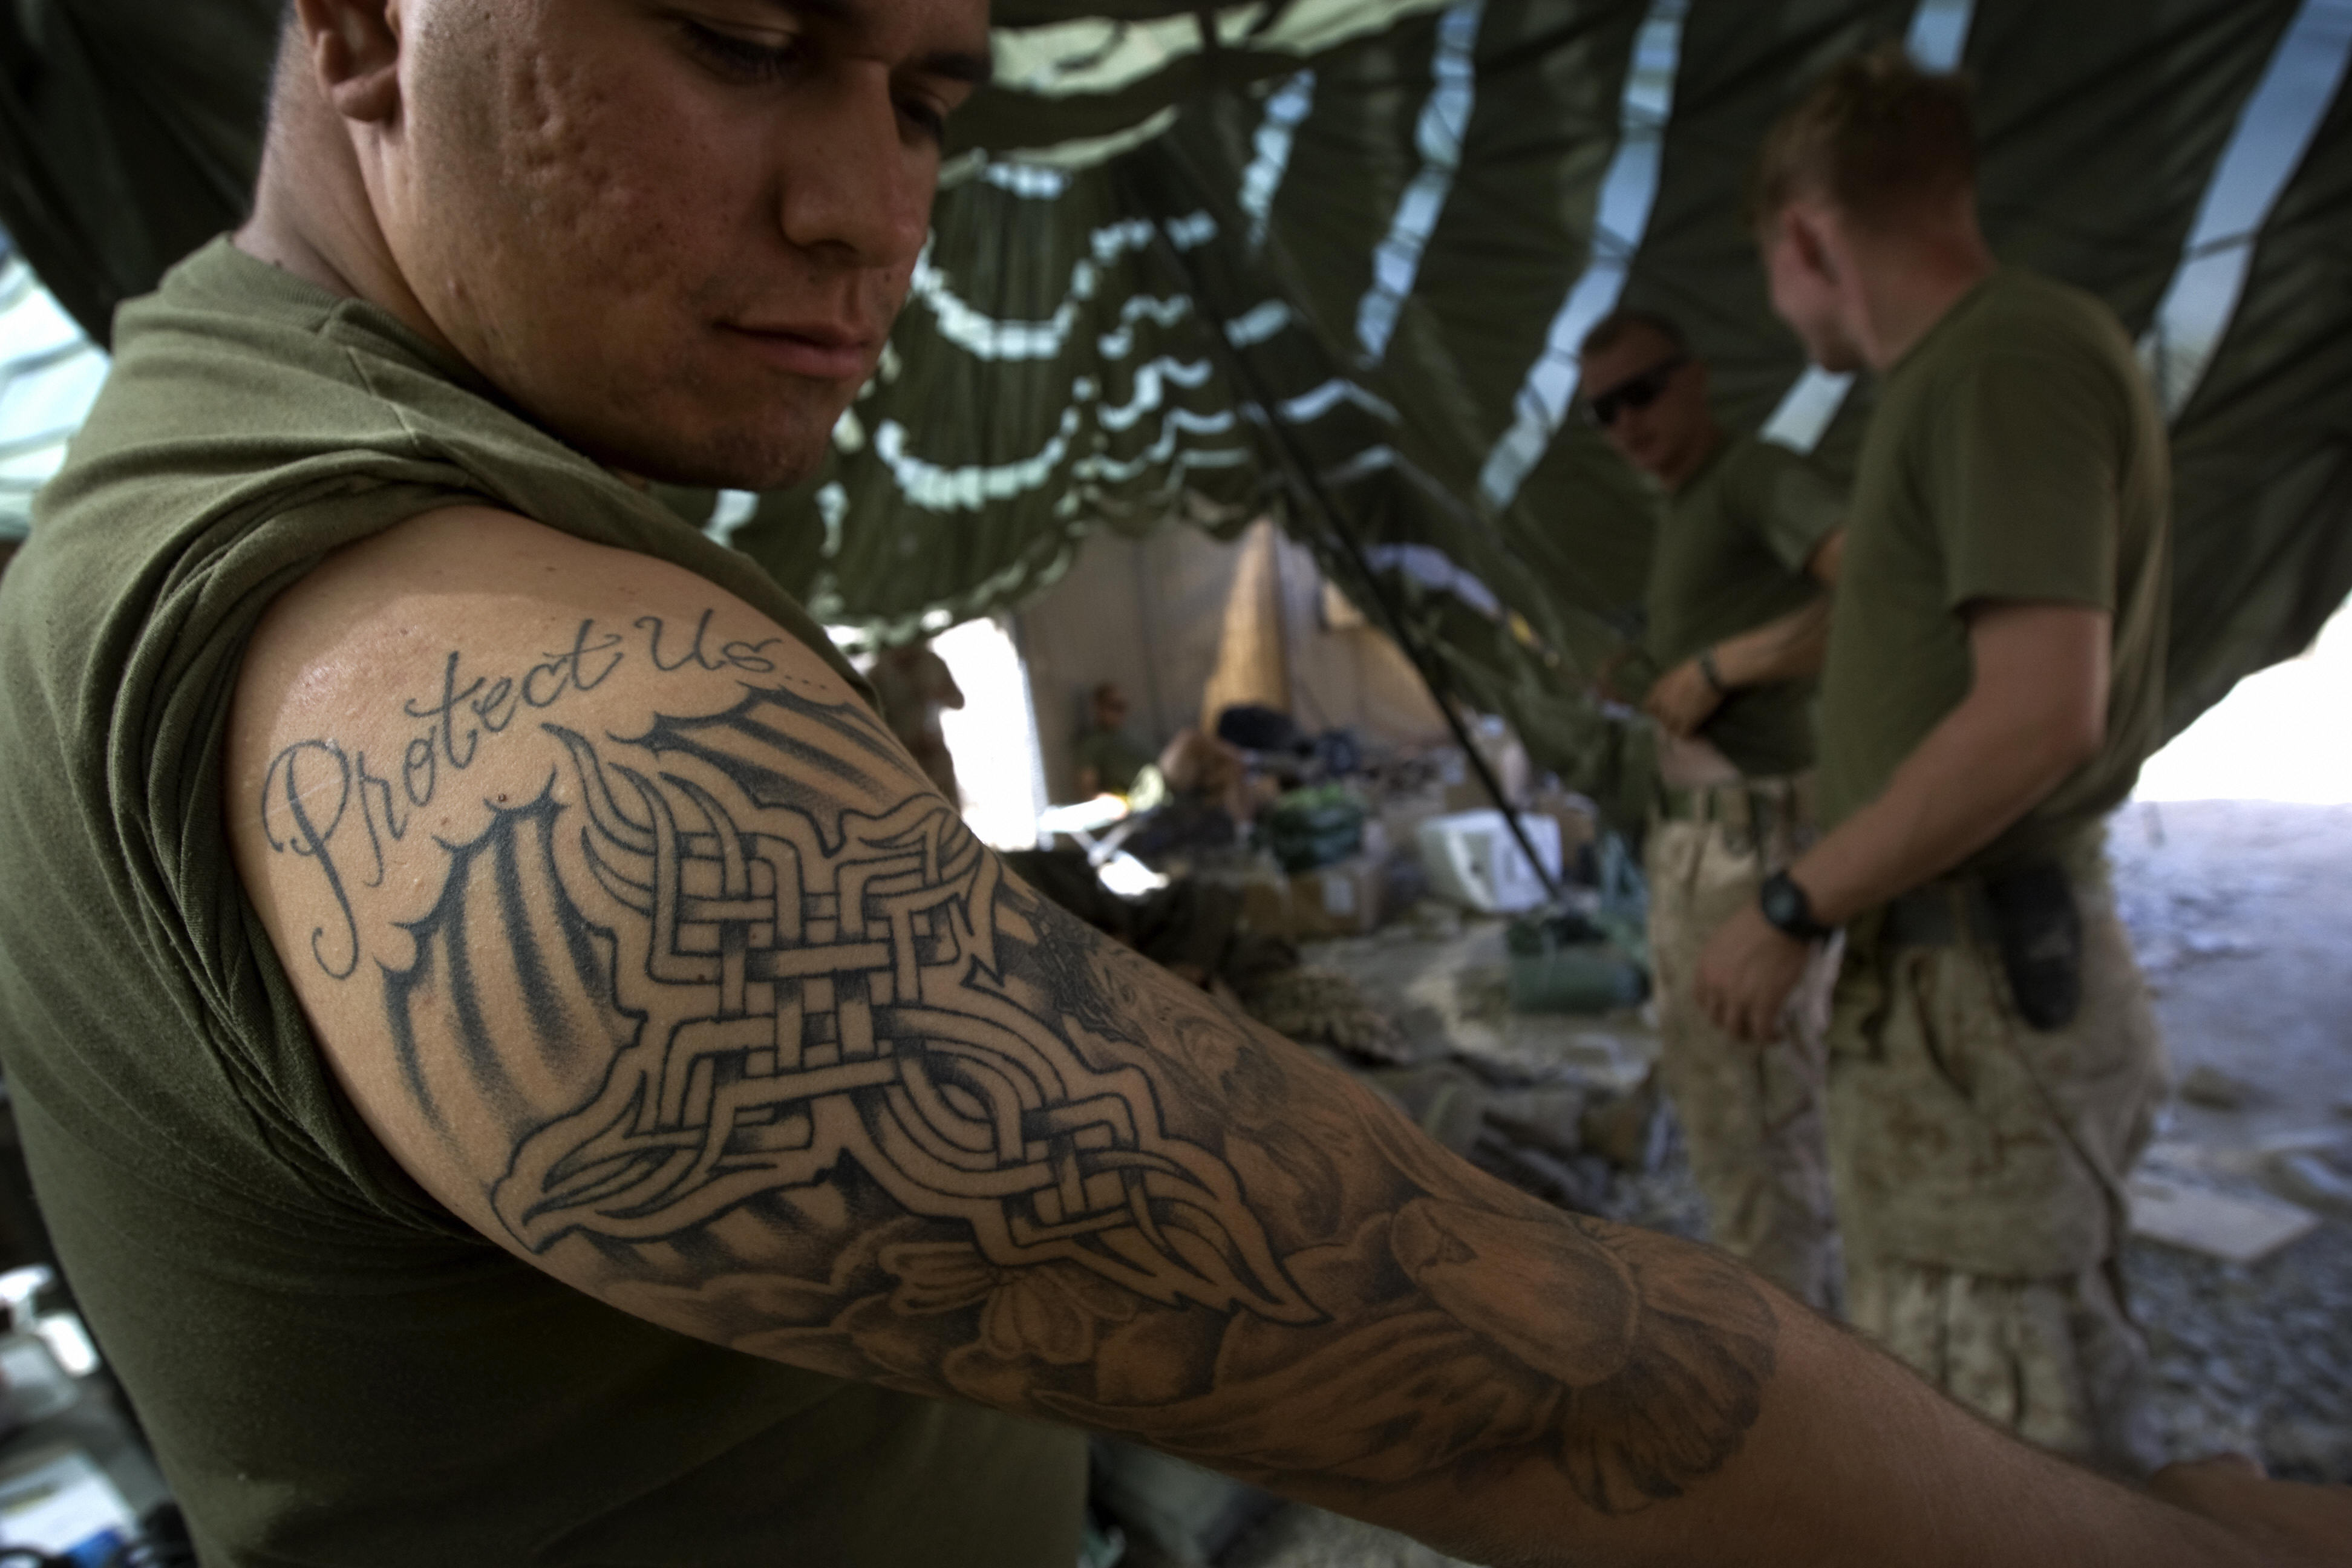 Marines Can Now Be Heavily Tattooed, But May Face Career Implications Over Their Ink